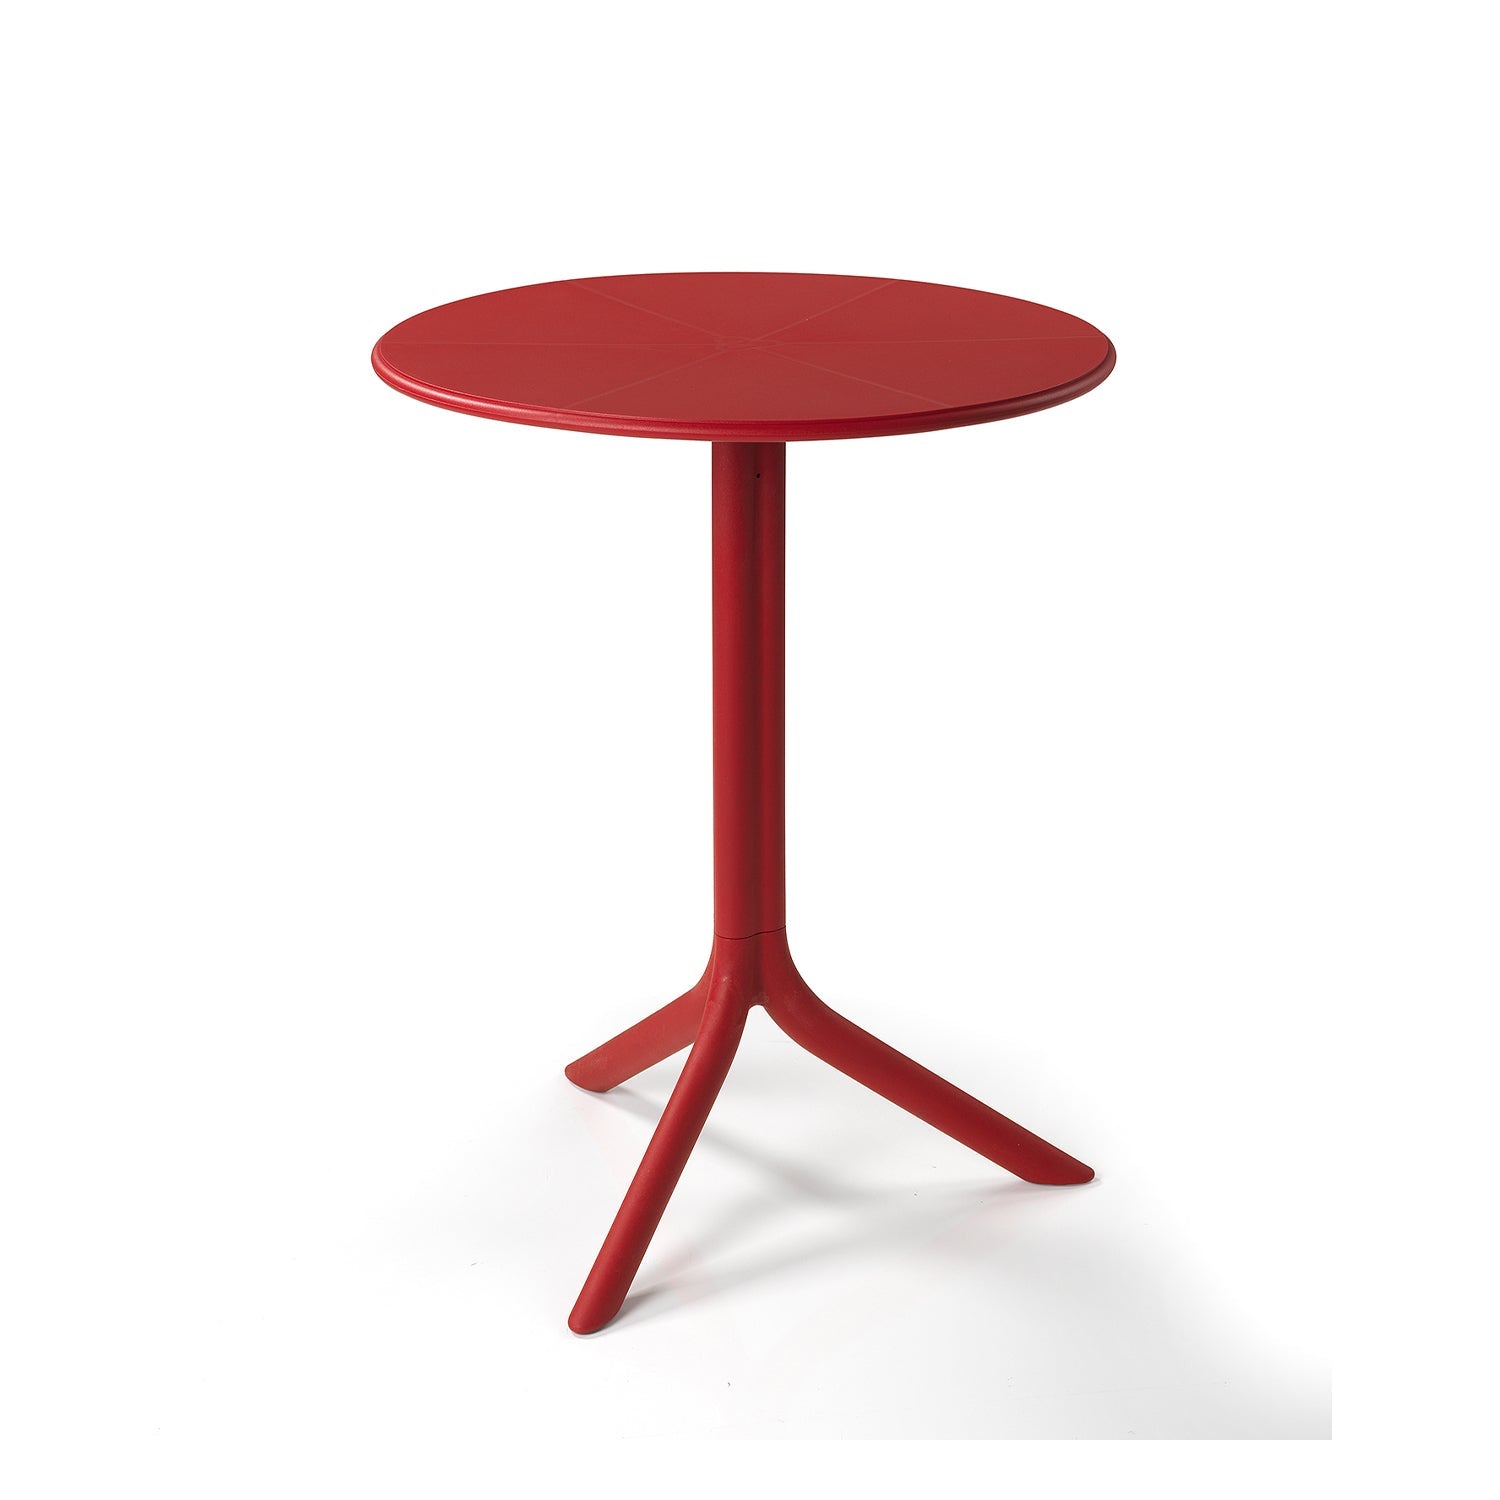 Add A Pop Of Colour With The Spritz Table By Nardi In Red